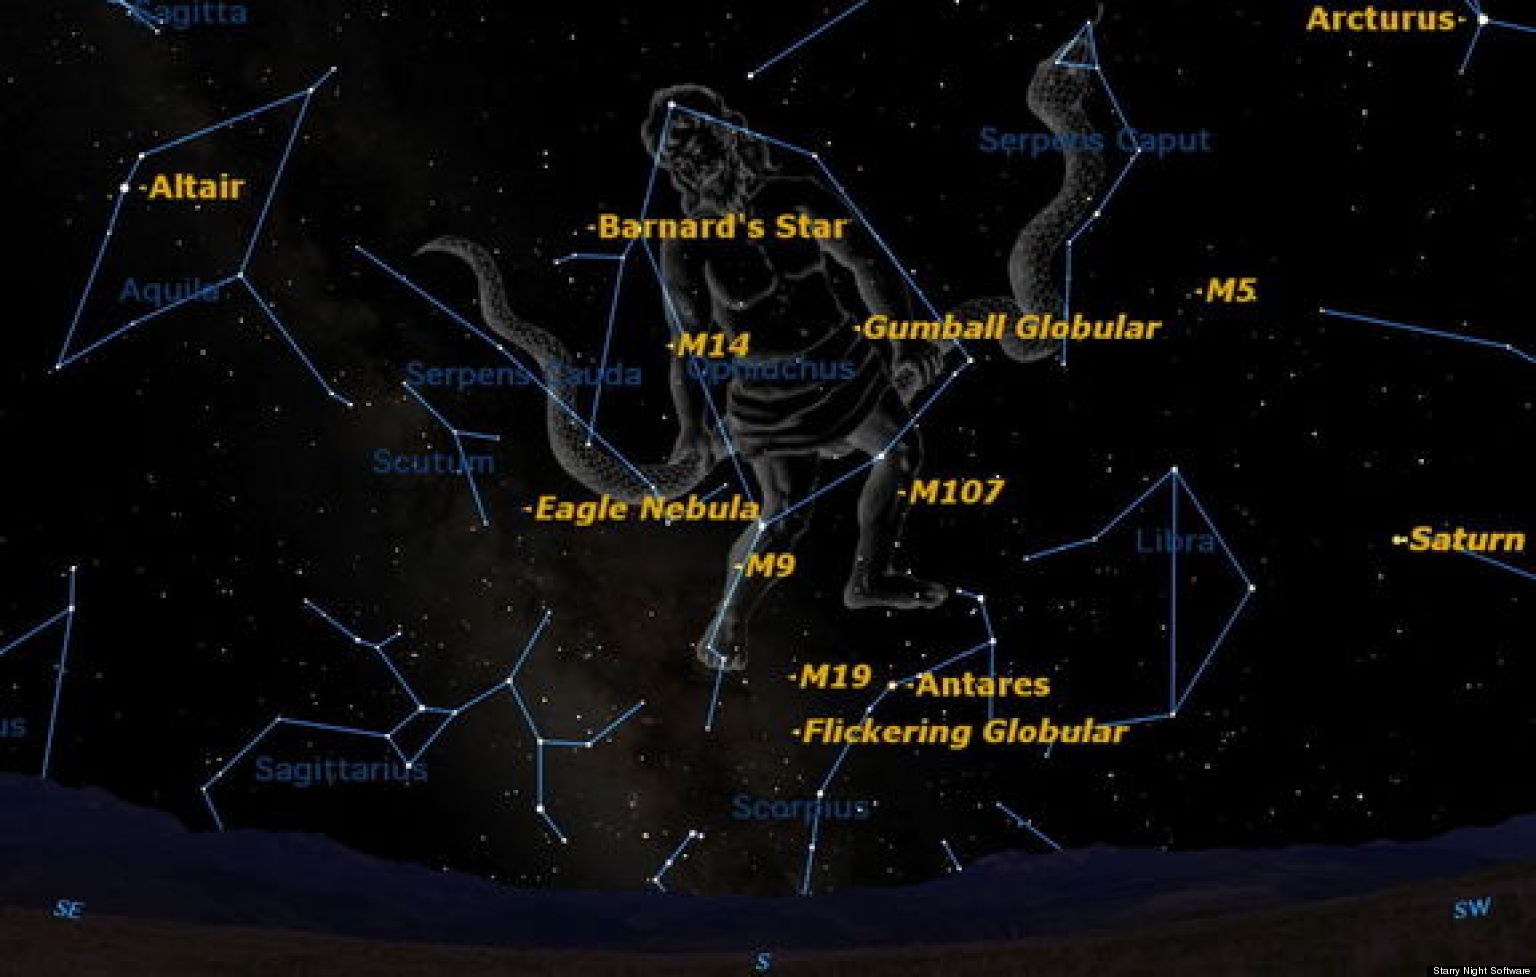 they say this constellation squeezed it's way in, but YourTango clarifies ... https://www.yourtango.com/2018309725/horoscope-how-zodiac-signs-change-over-time-according-astrological-progression